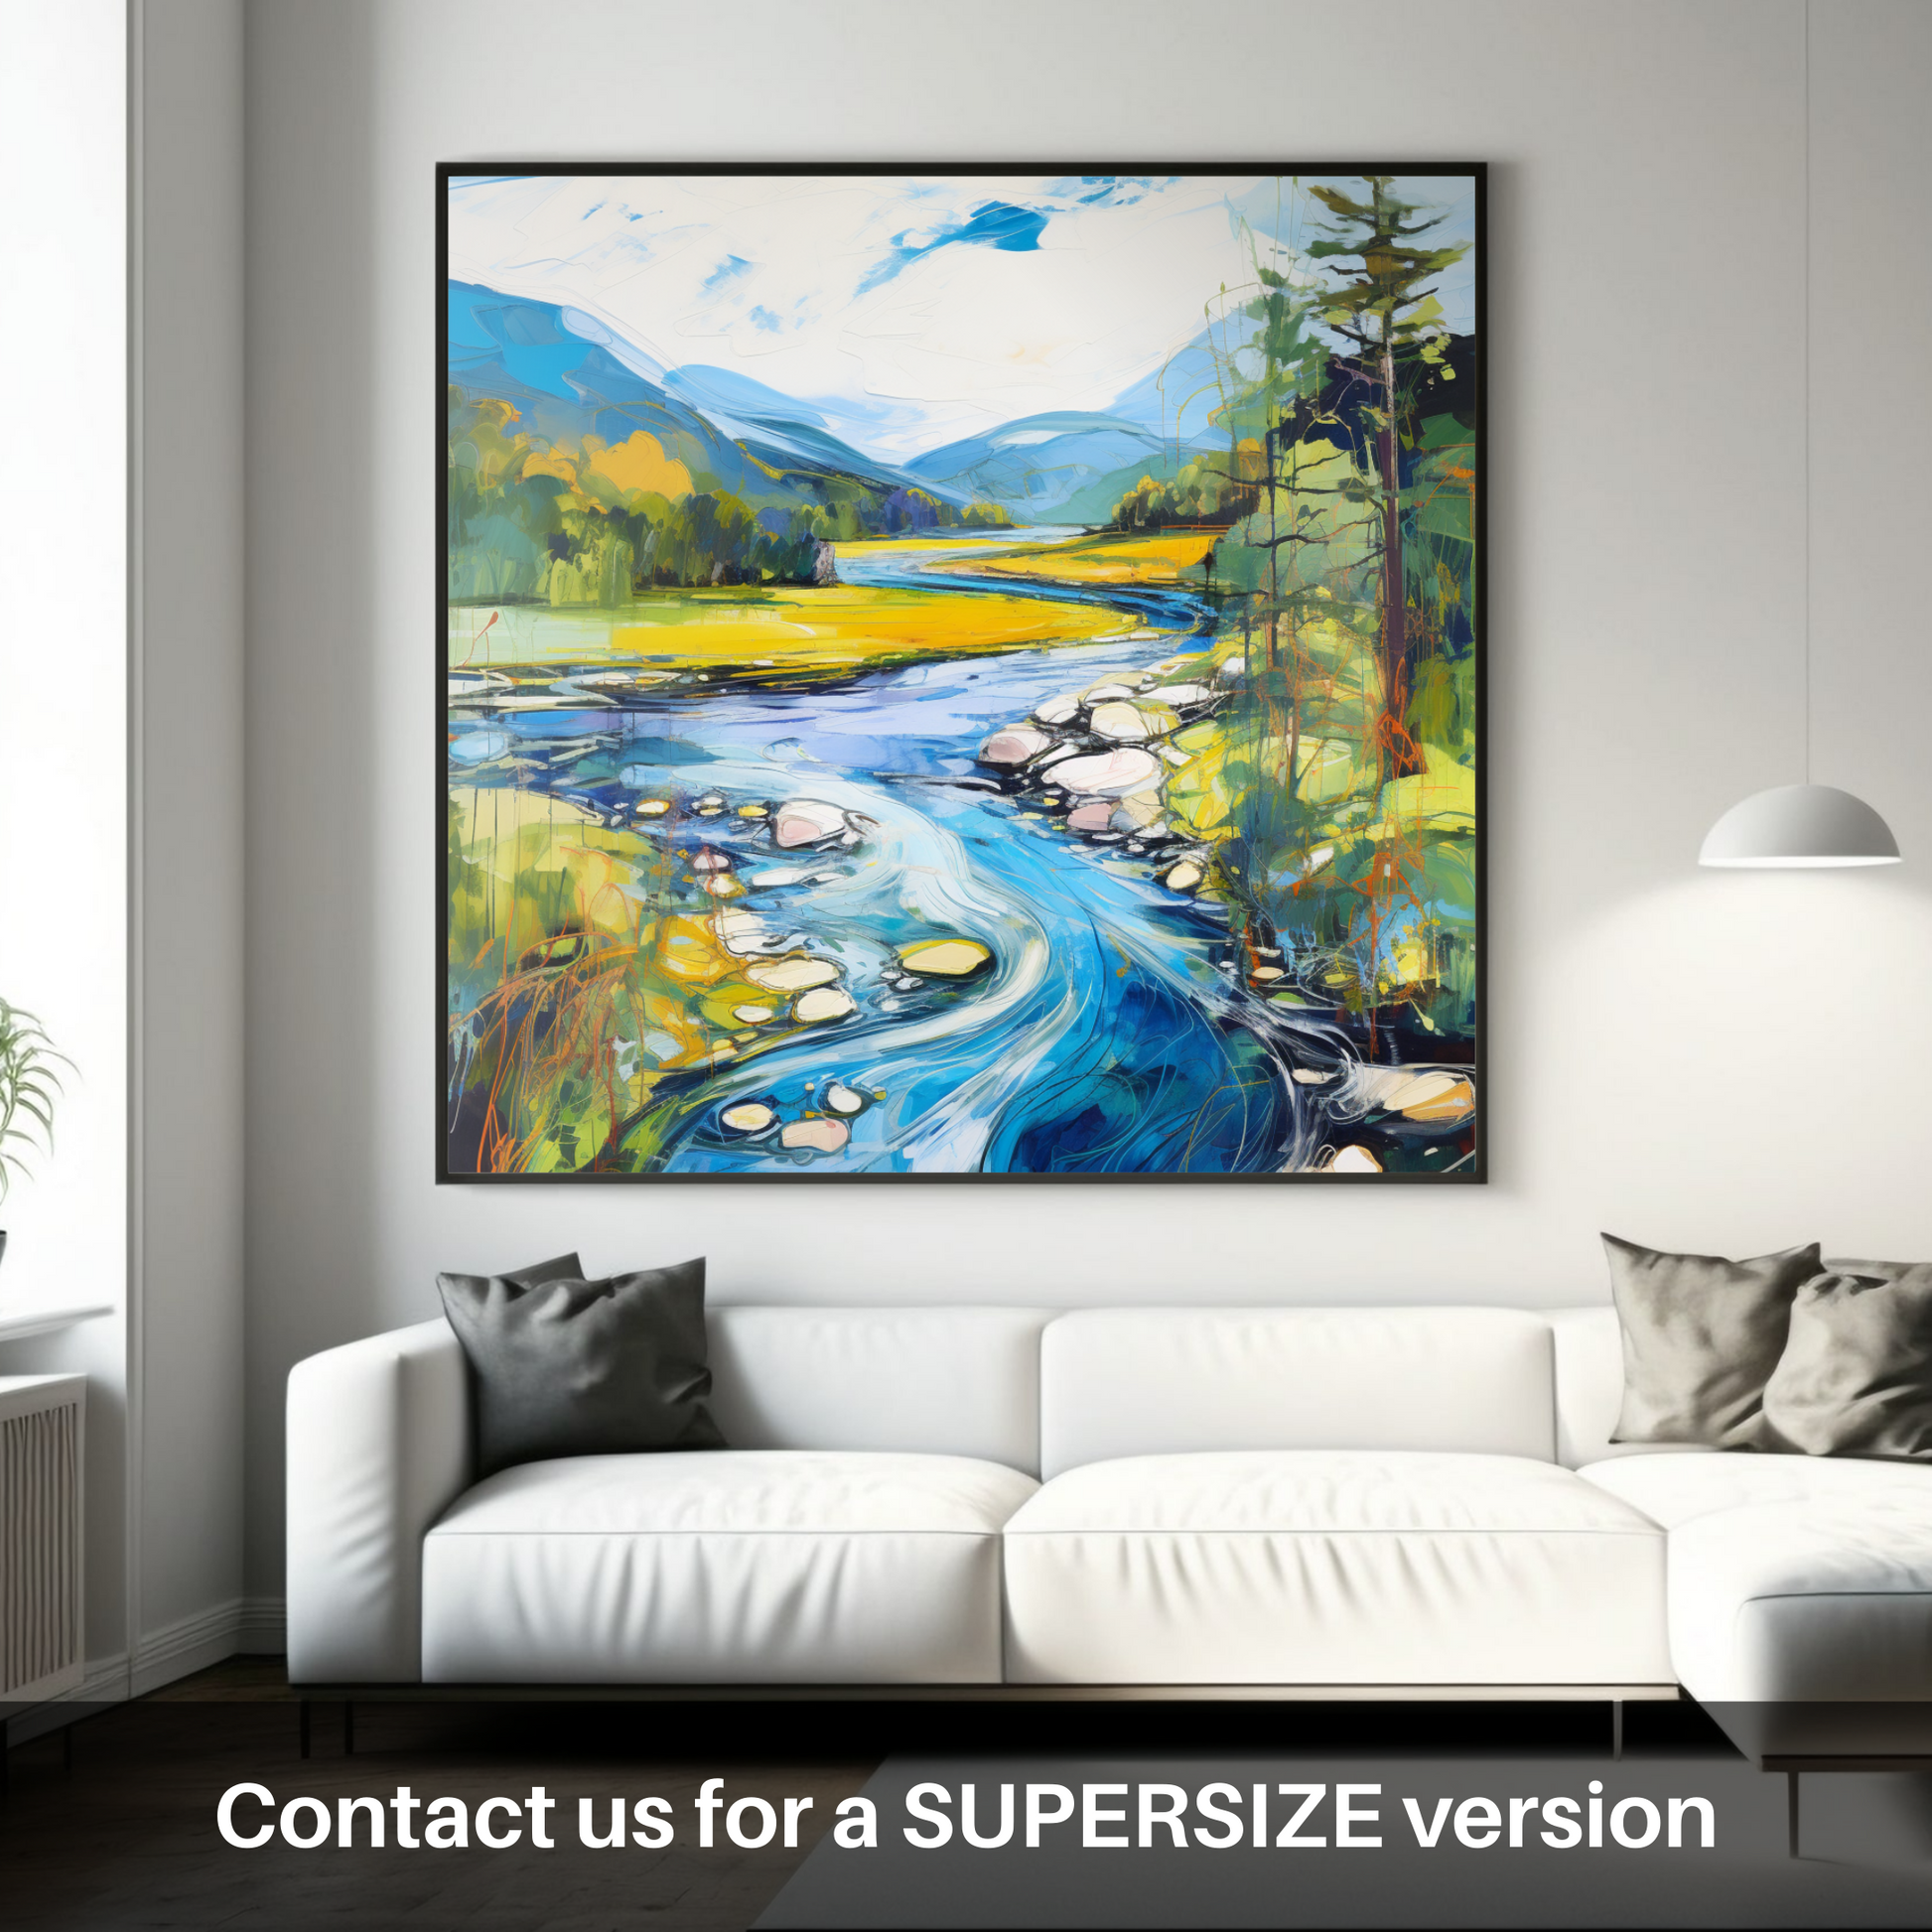 Huge supersize print of River Orchy, Argyll and Bute in summer